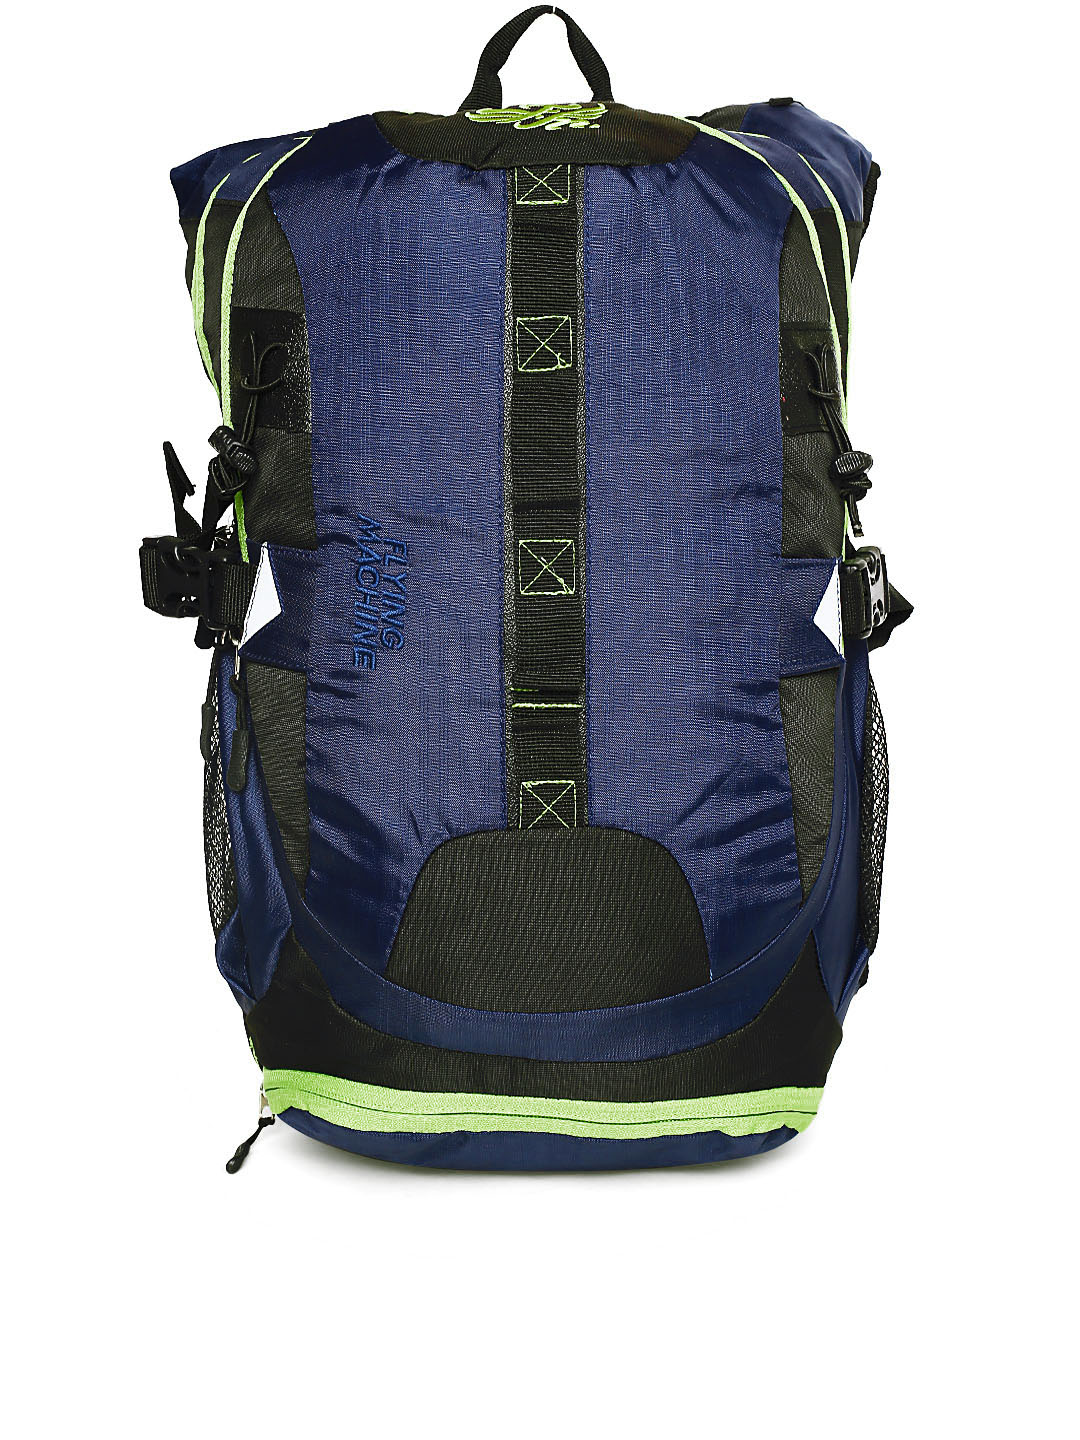 Flying Machine Unisex Navy Blue & Black Solid Laptop Backpack Price in India